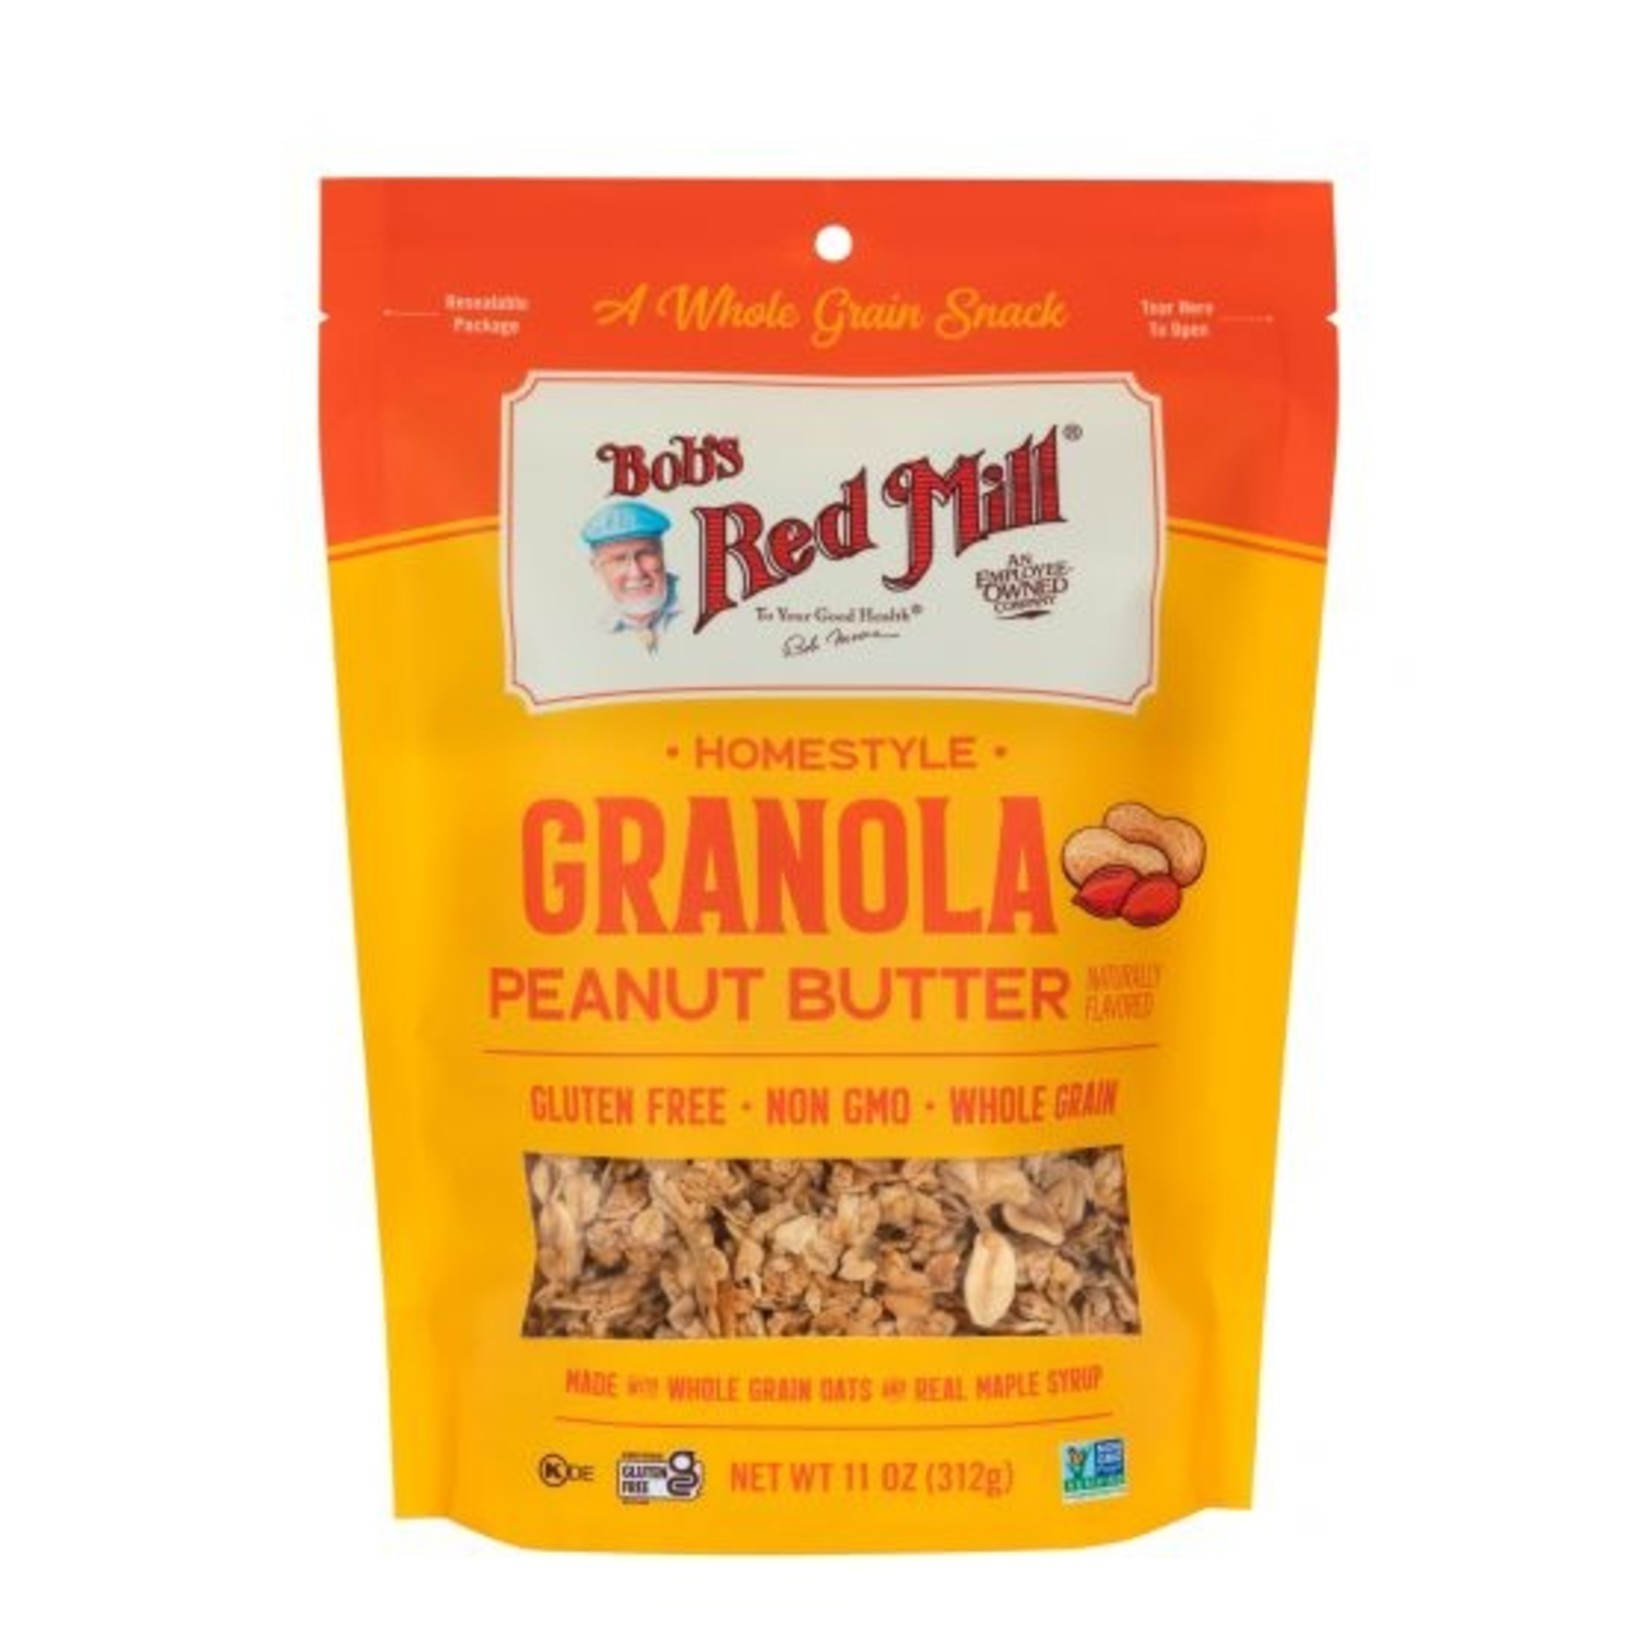 Bobs Red Mill Bobs Red Mill - Homestyle Granola Peanut Butter - 11 oz